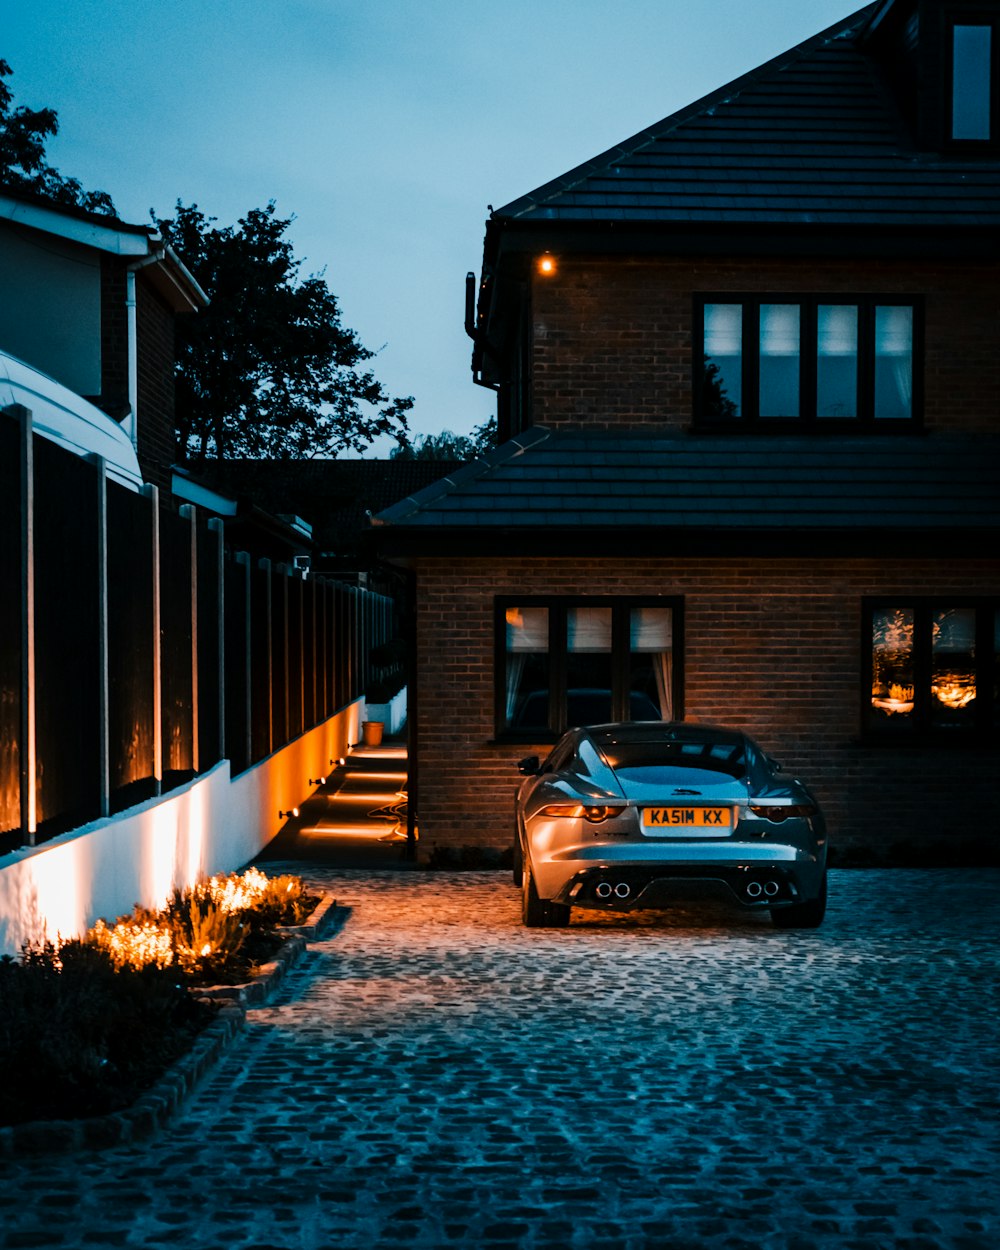 A car parked in front of a house at night photo – Free Uk Image on Unsplash